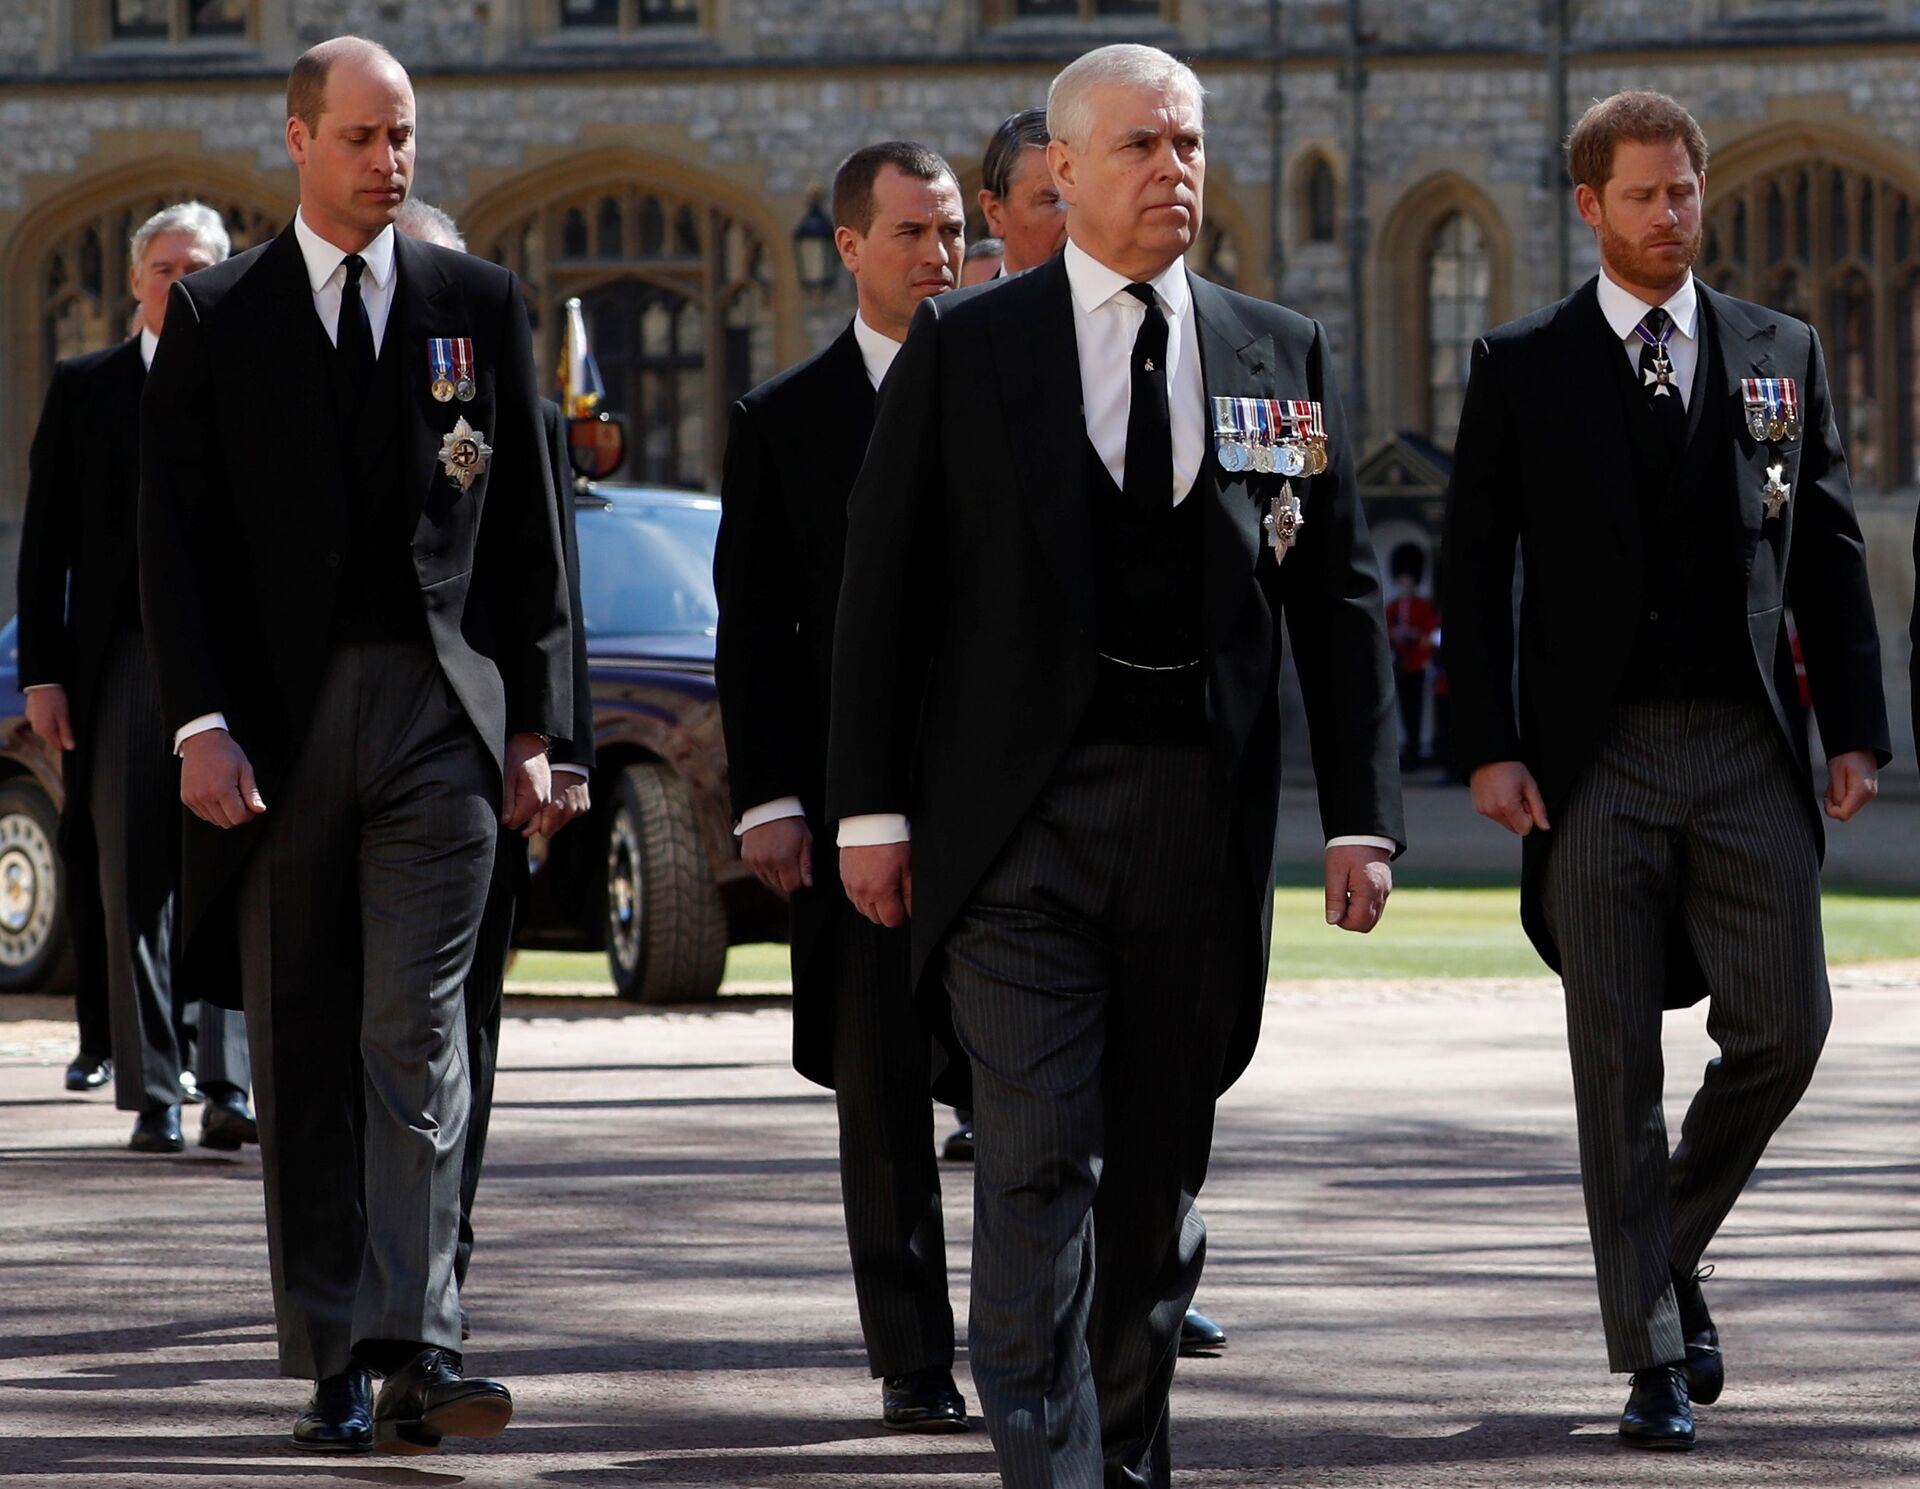 Britain's Prince William, Duke of Cambridge, Britain's Prince Harry, Duke of Sussex and members of the Royal Family walk behind the hearse on the grounds of Windsor Castle during the funeral of Britain's Prince Philip, husband of Queen Elizabeth, who died at the age of 99, in Windsor, Britain, April 17, 202 - Sputnik International, 1920, 19.09.2021